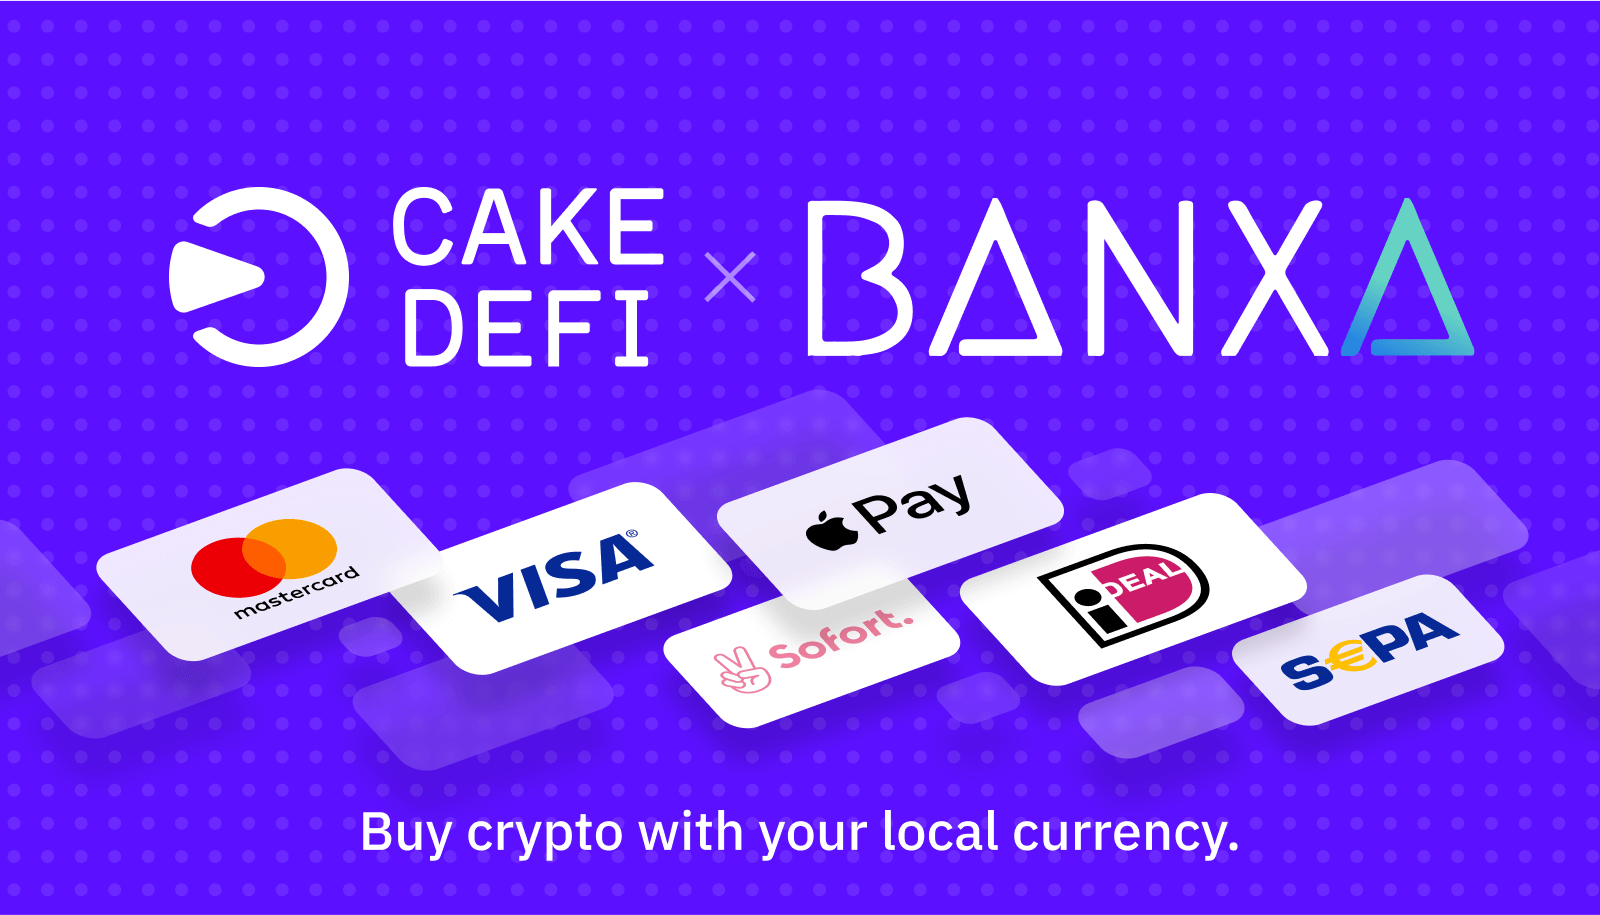 You can now buy Bitcoin using credit card or bank transfer on Cake! 🎉